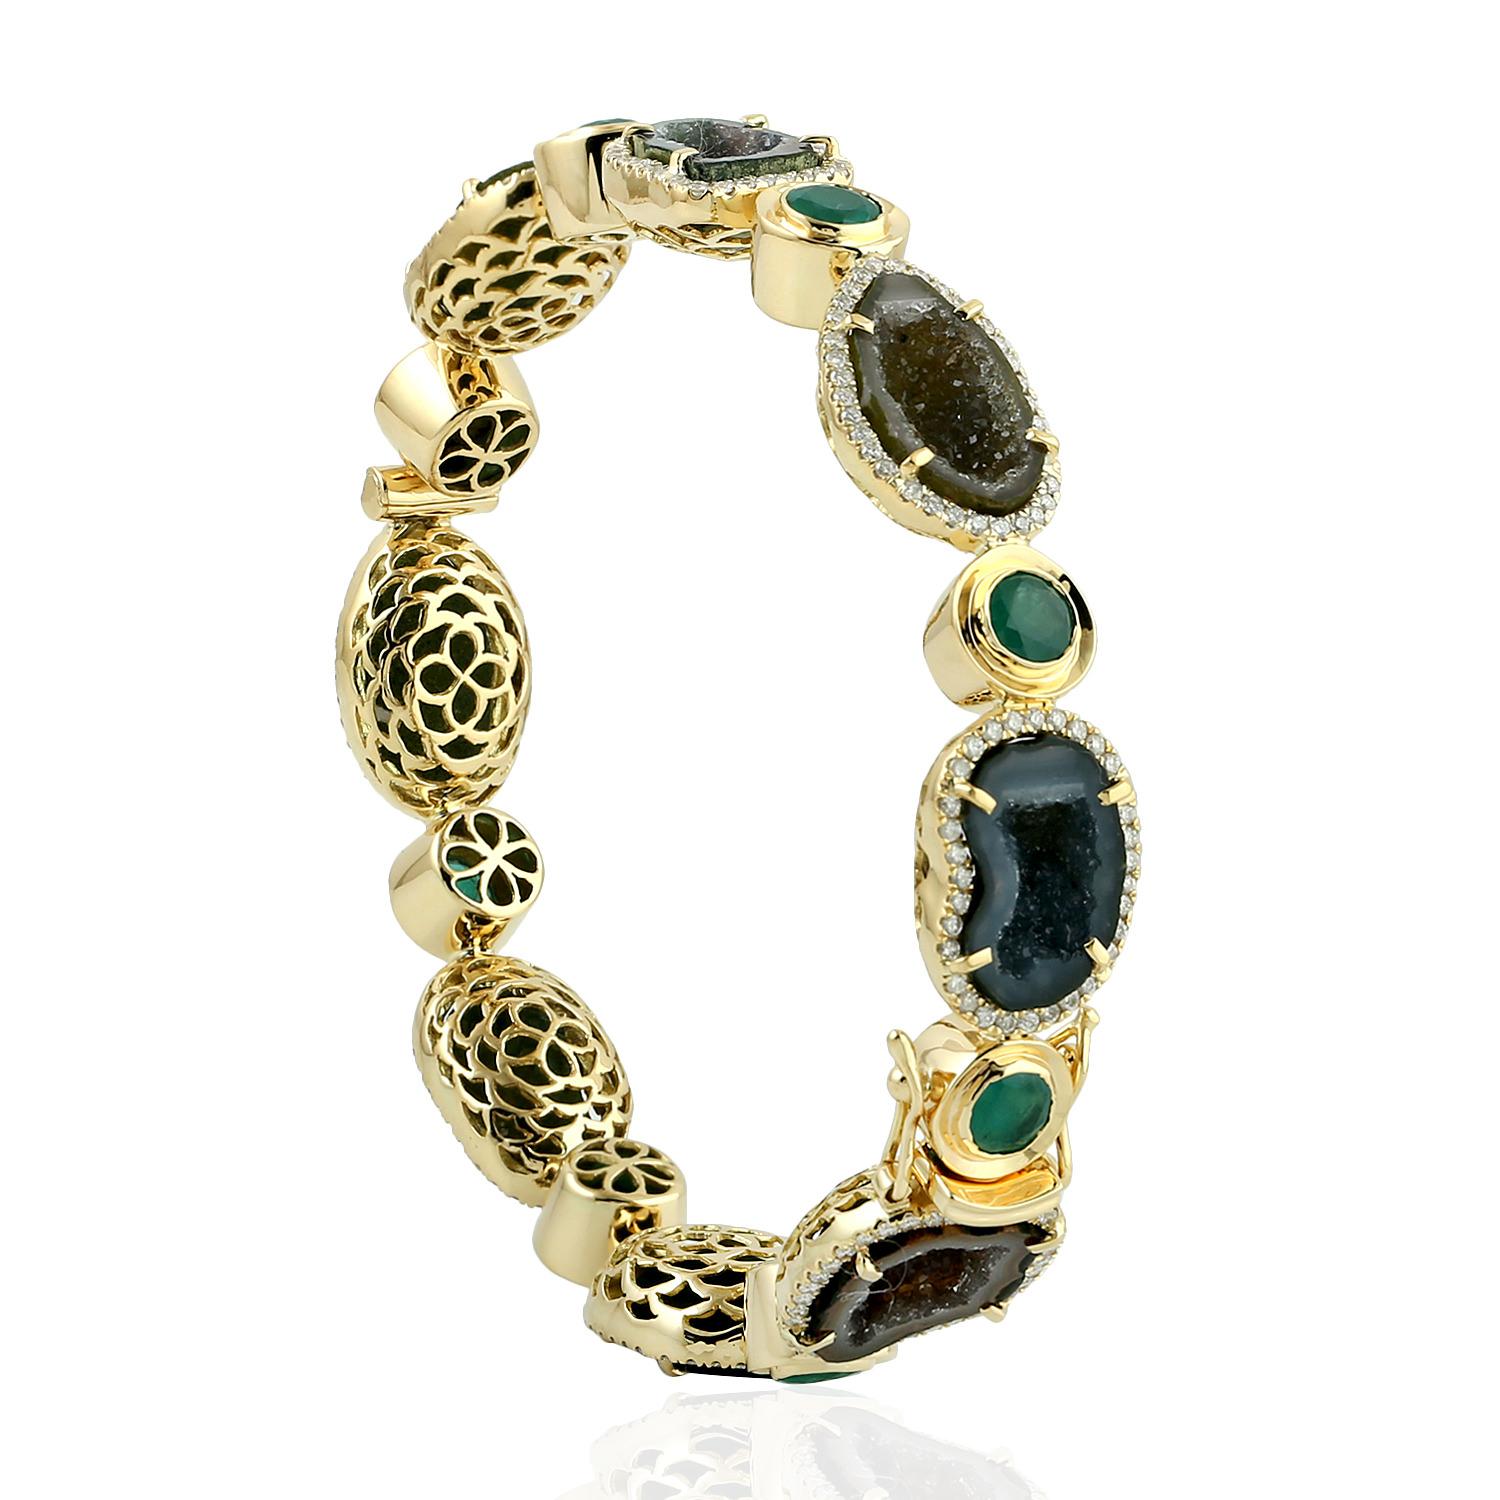 A stunning bracelet handmade in 18K gold. It is set in natural geodes, 3.63 carats emerald and 1.61 carats of glimmering diamonds. Clasp Closure

FOLLOW  MEGHNA JEWELS storefront to view the latest collection & exclusive pieces.  Meghna Jewels is